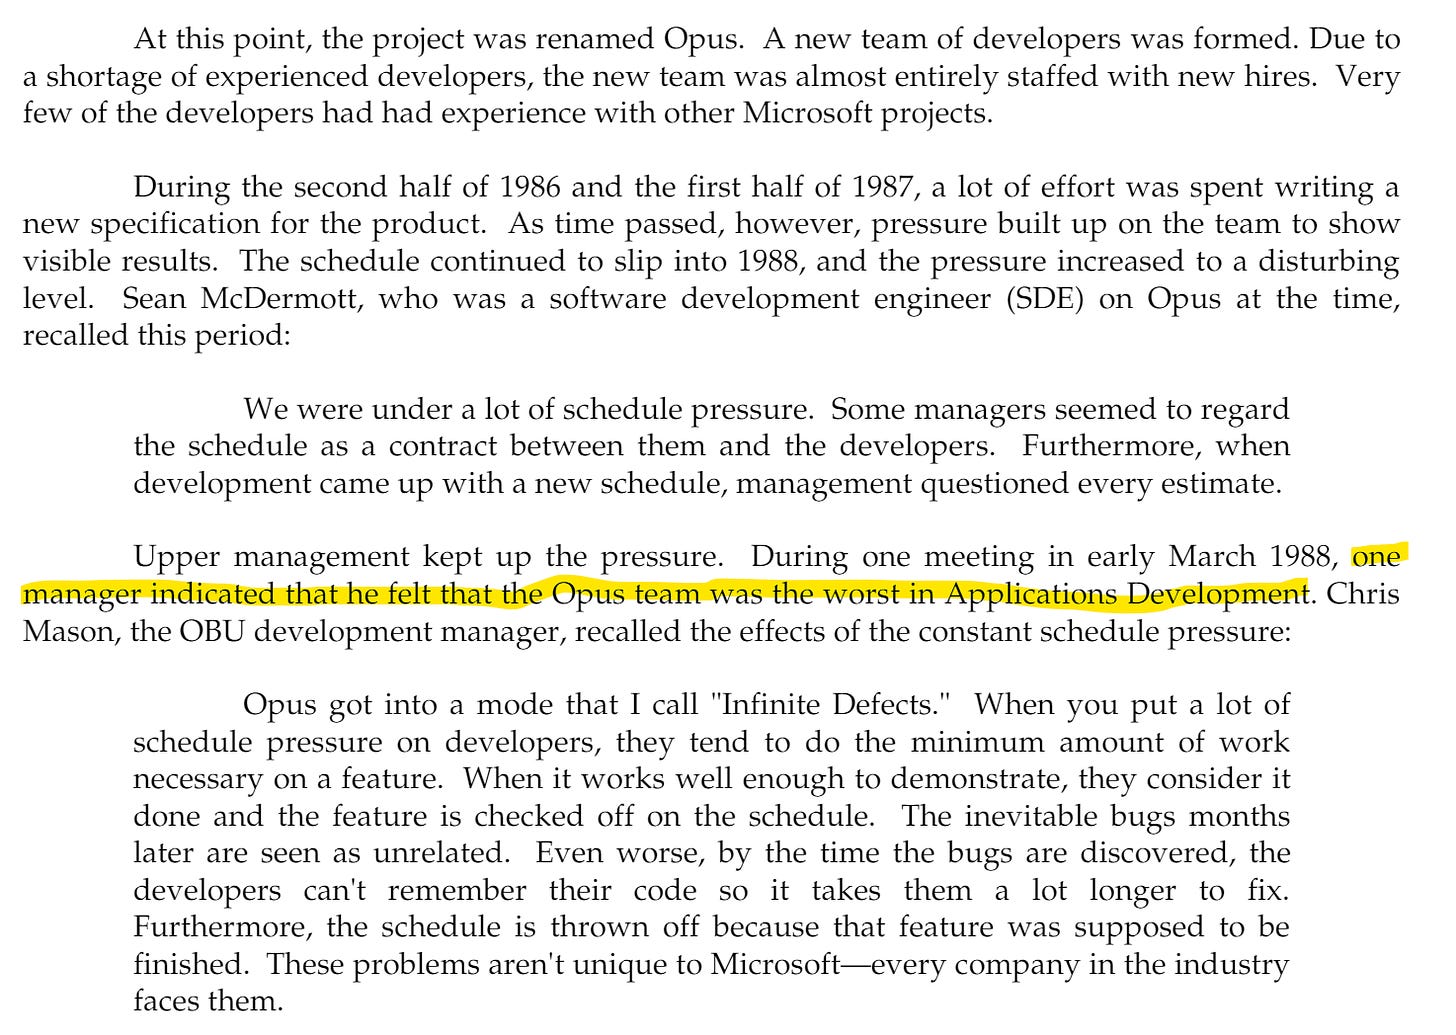 "During one meeting in early March 1988, one manager indicated that he felt the Opus team was the worst in Applications Development."